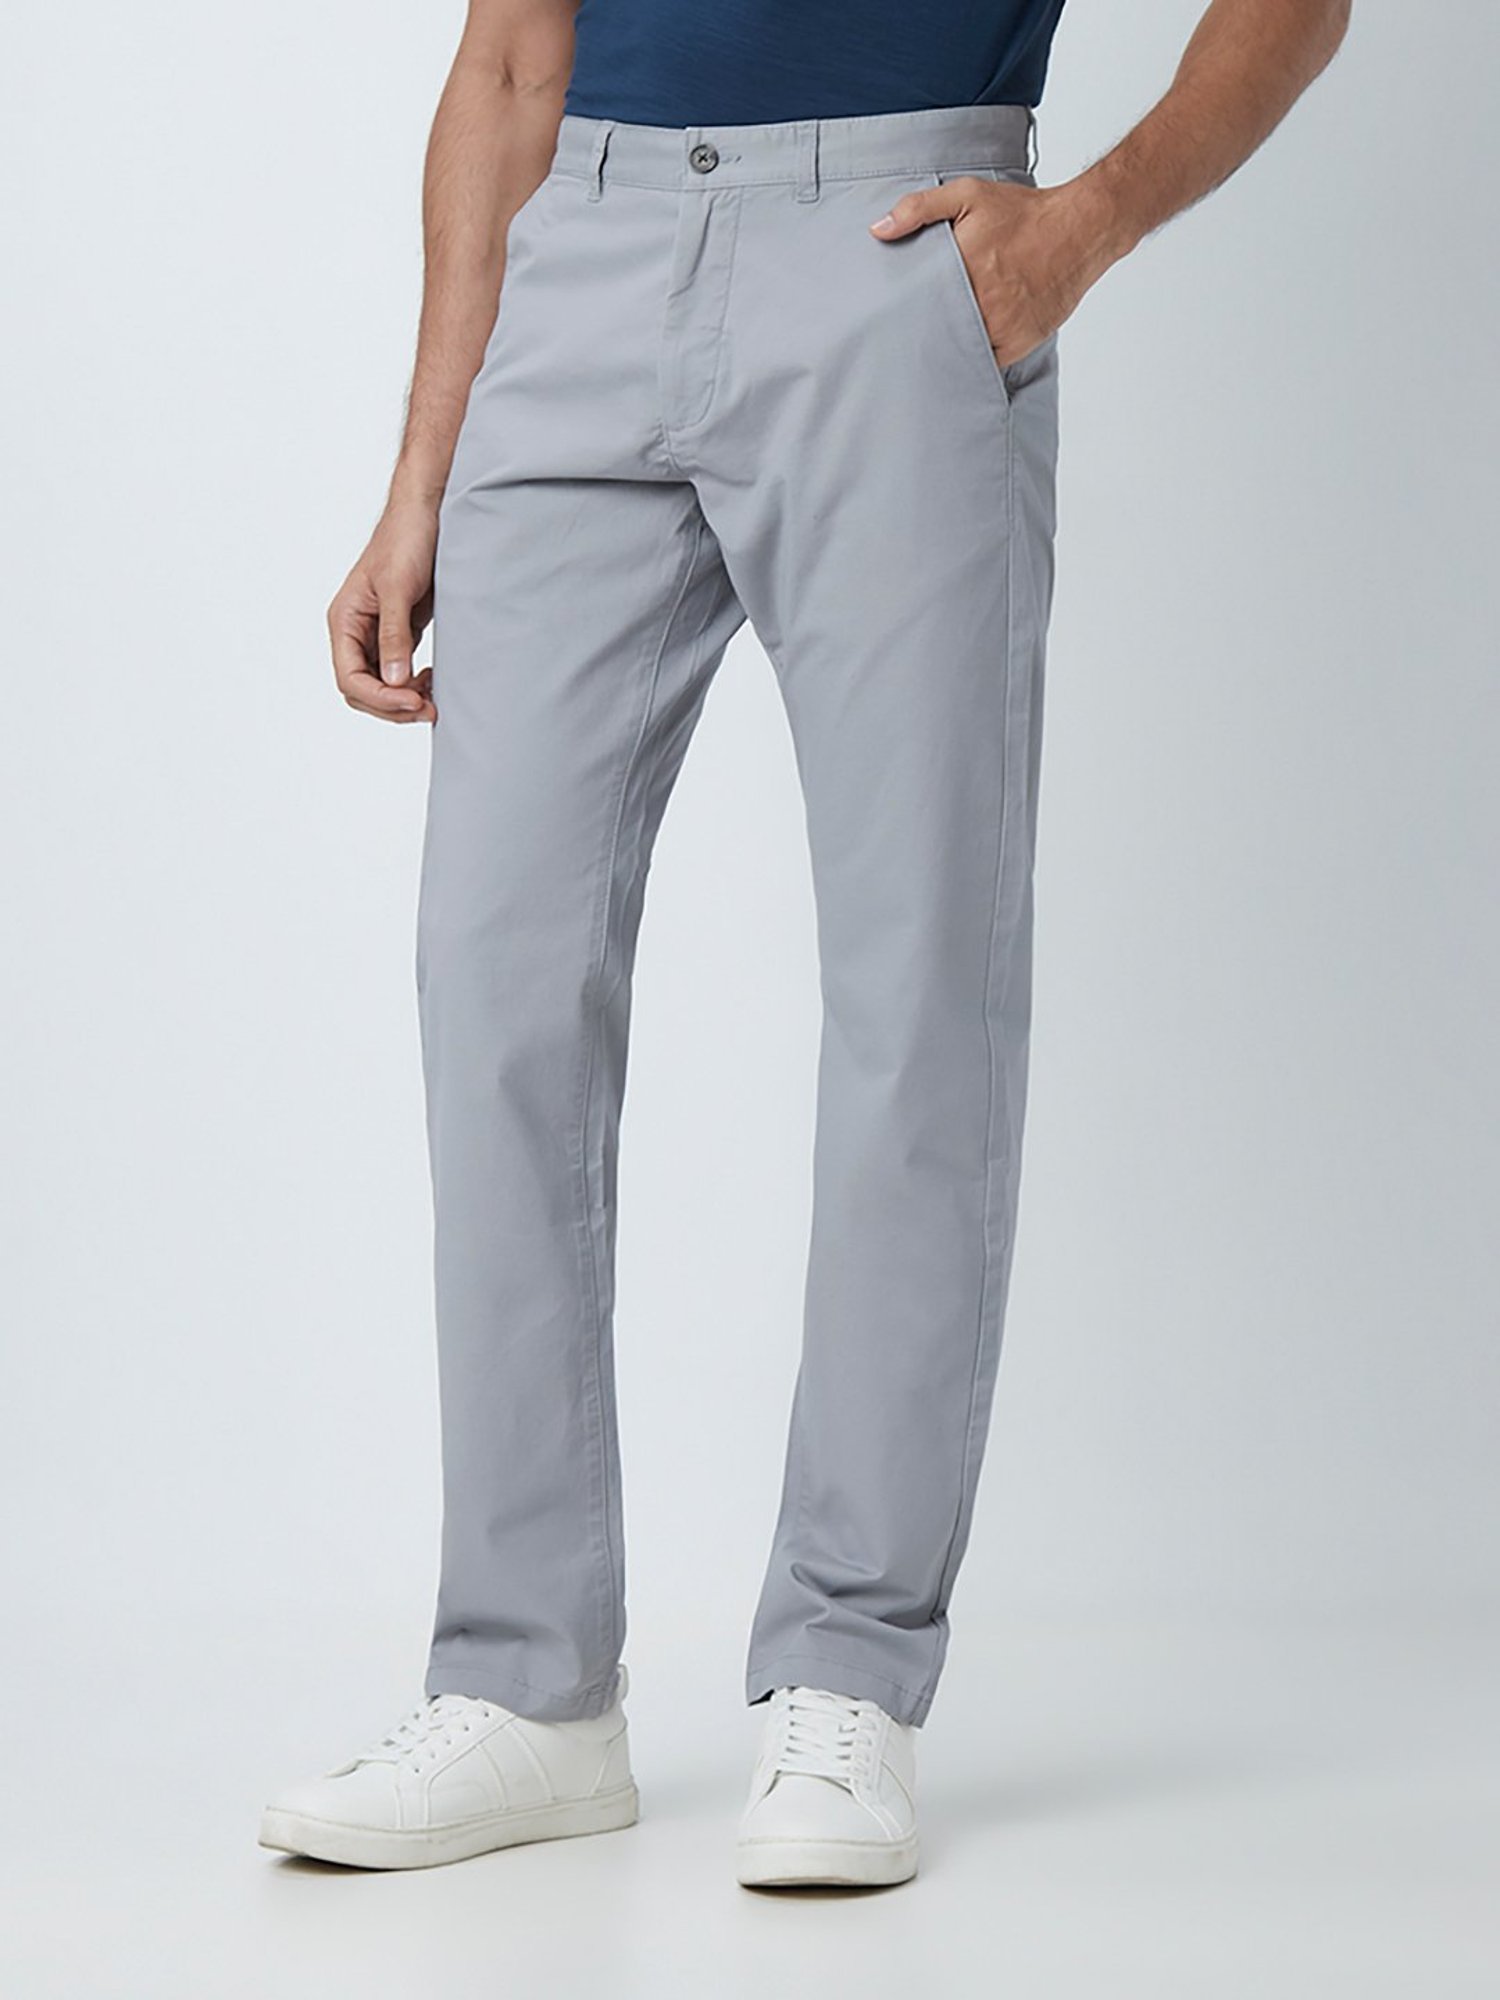 Solid Mens Chino Trousers at Rs 630/piece in Ahmedabad | ID: 21785852662